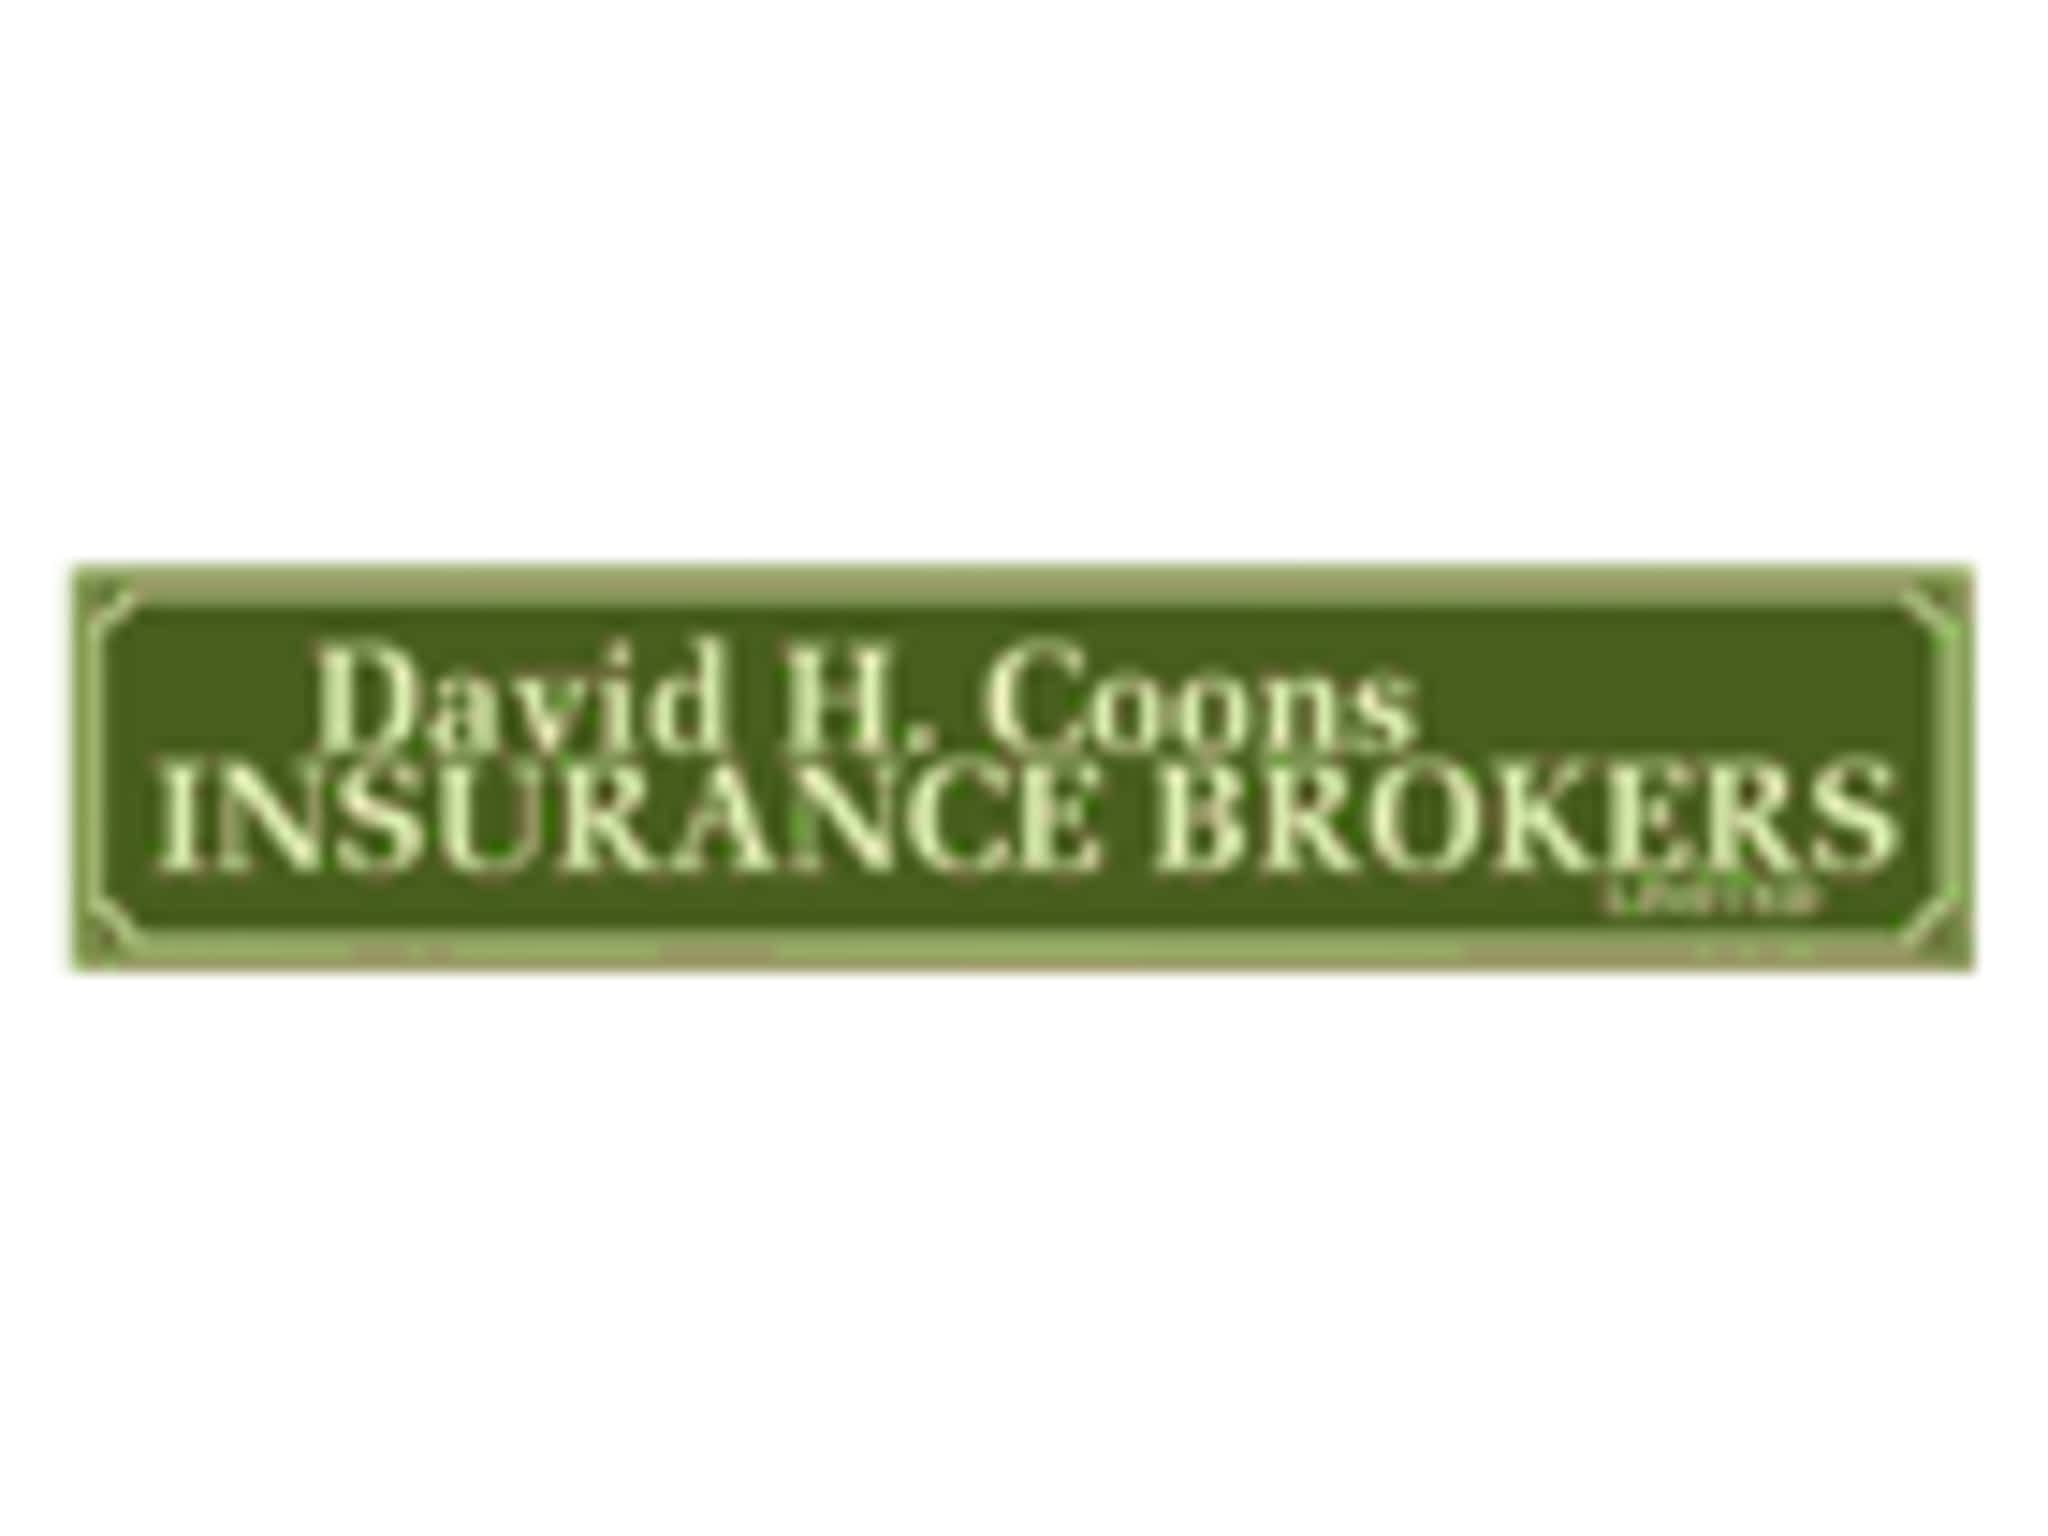 photo Coons David H Insurance Brokers Limited